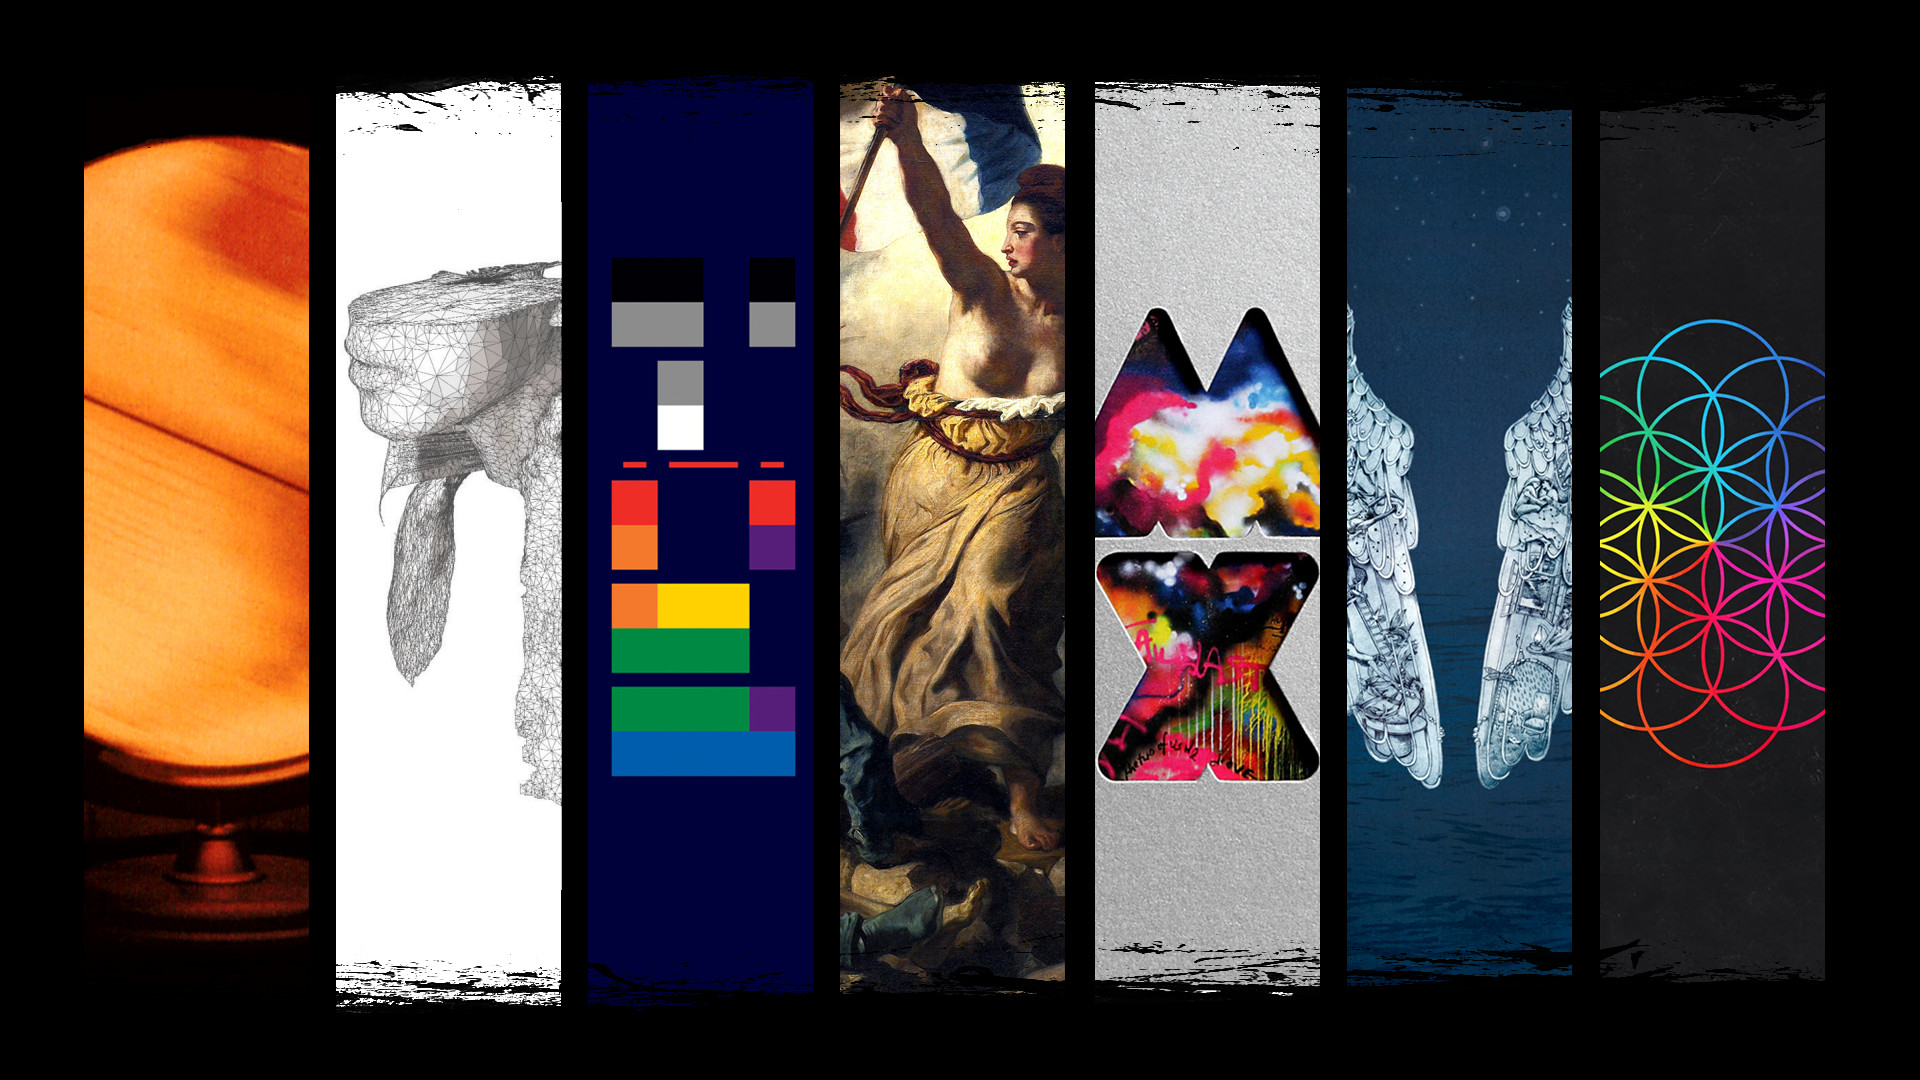 Coldplay Wallpaper Discover more Coldplay, Coldplay Logo, Music, Rock  wallpaper. https://www.ixpap.com/coldplay-wal… | Coldplay wallpaper,  Coldplay tattoo, Coldplay